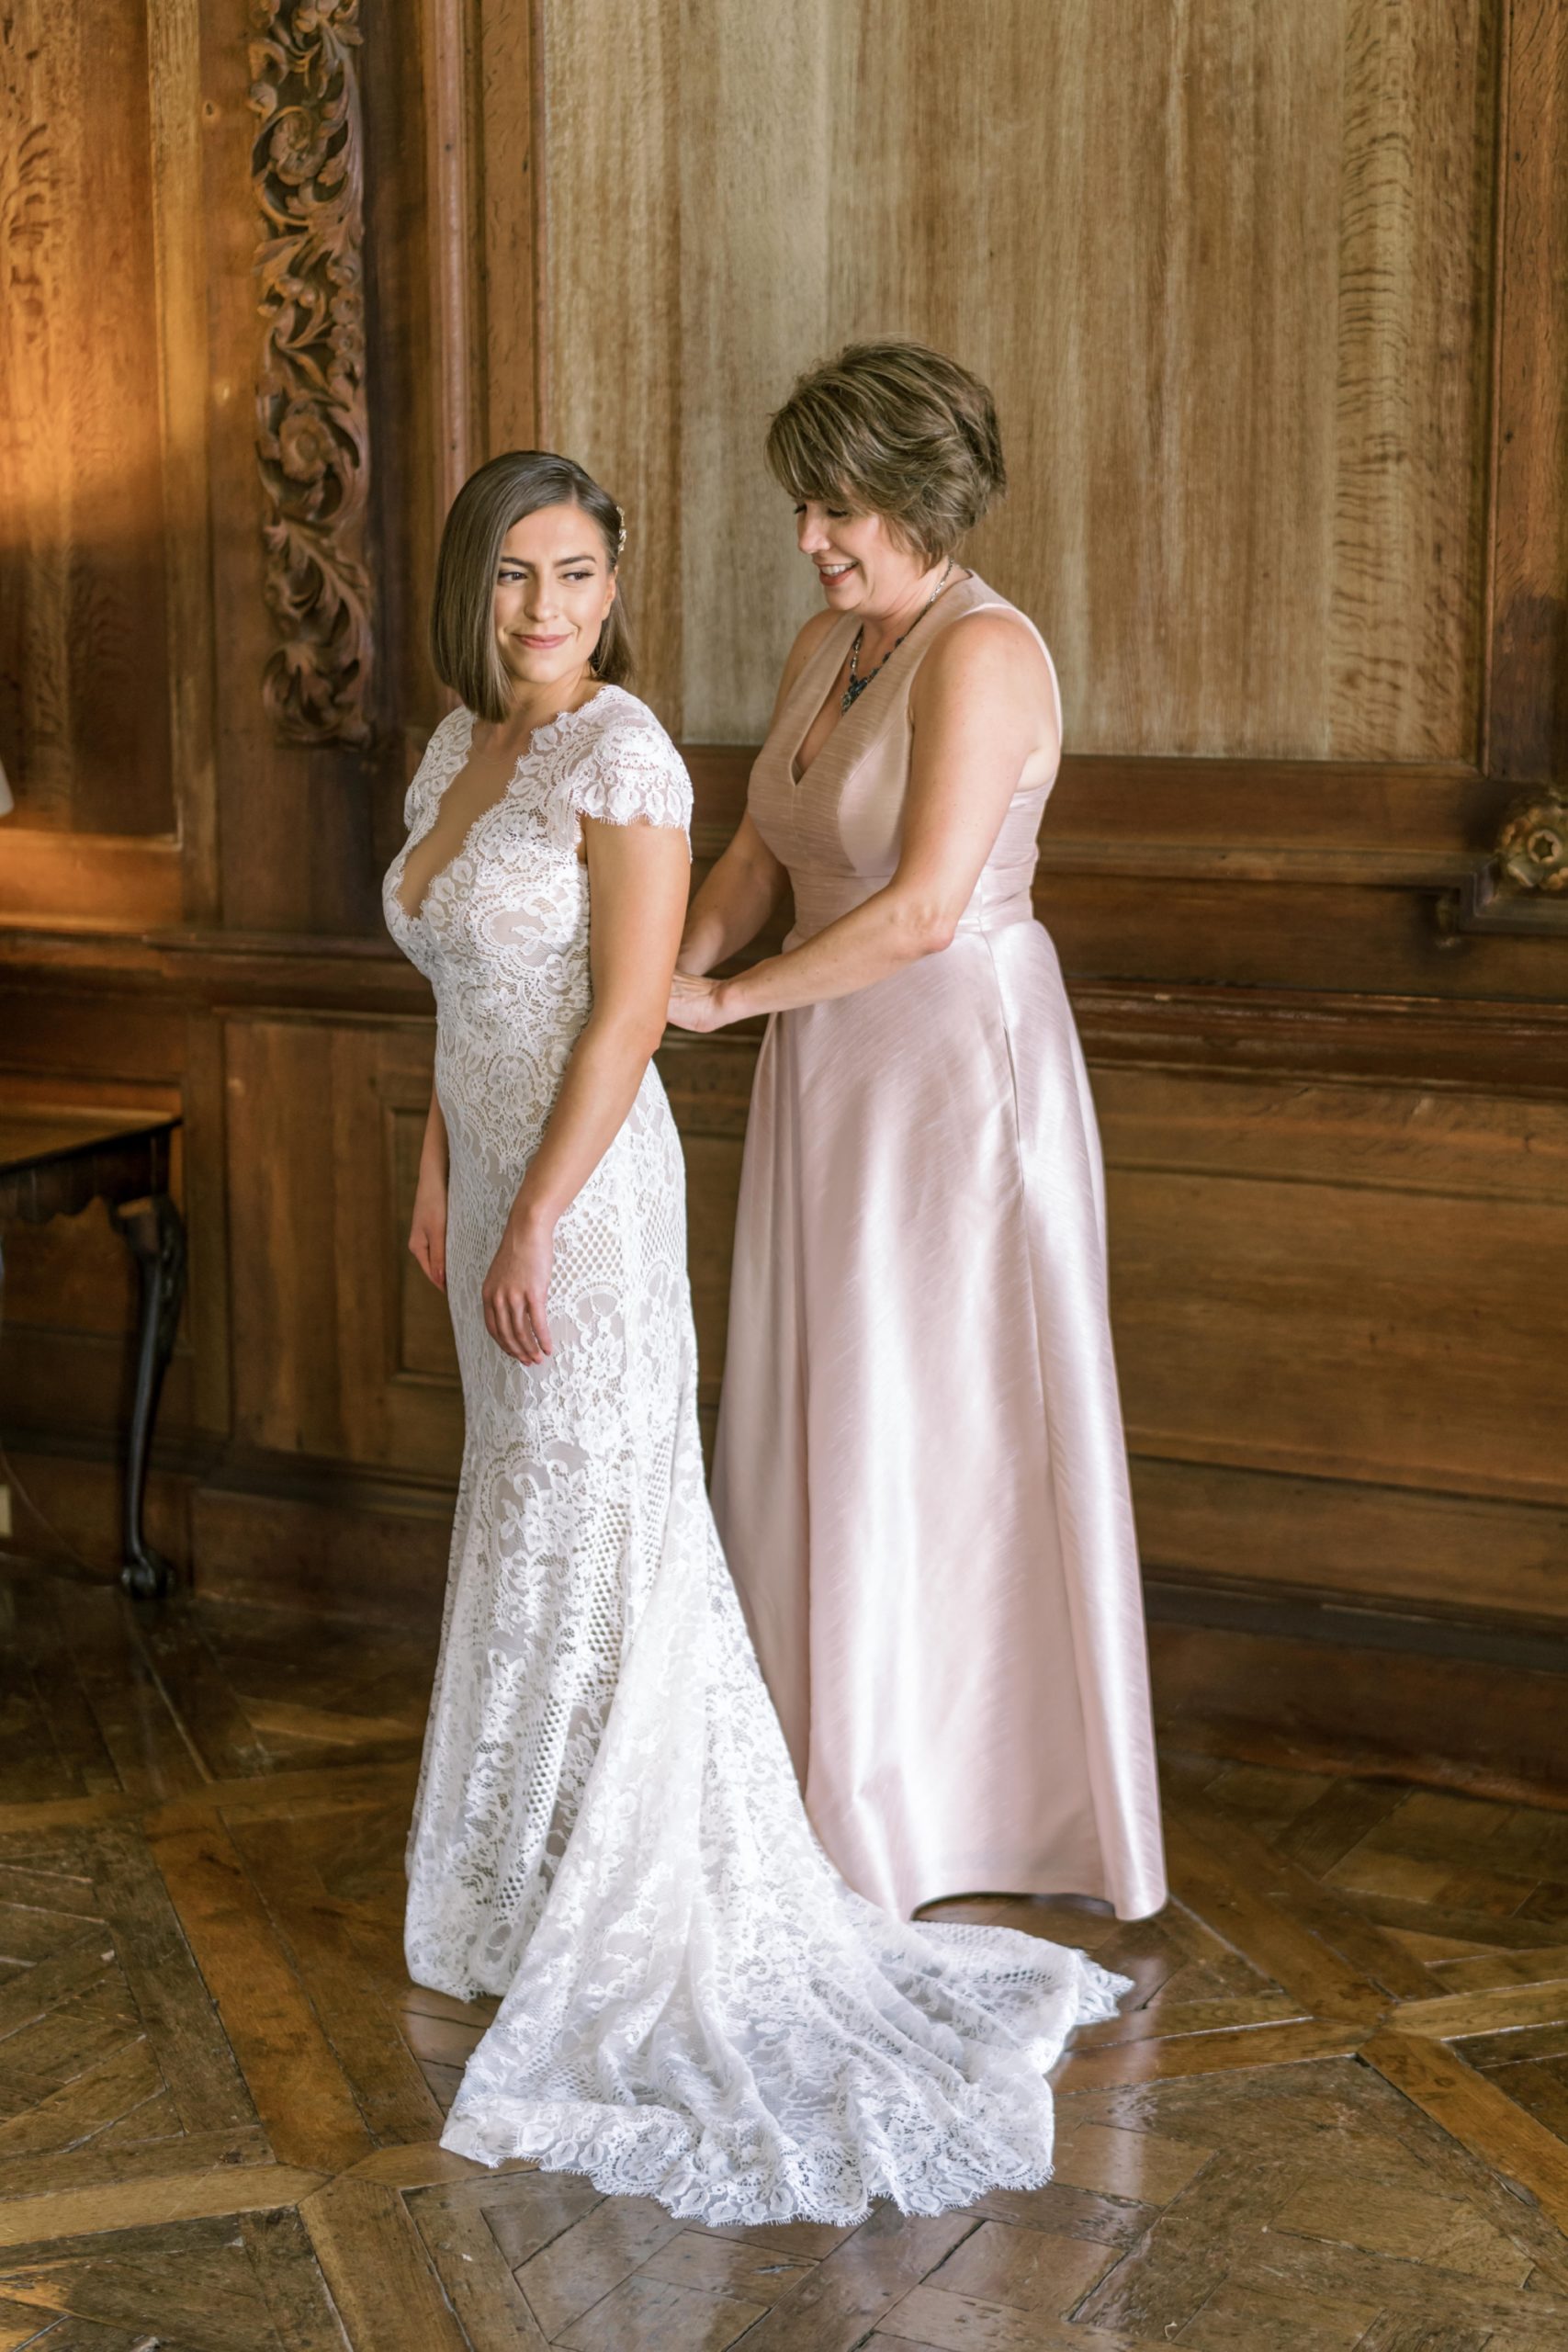 the mother of the bride helped the bride into her wedding dress